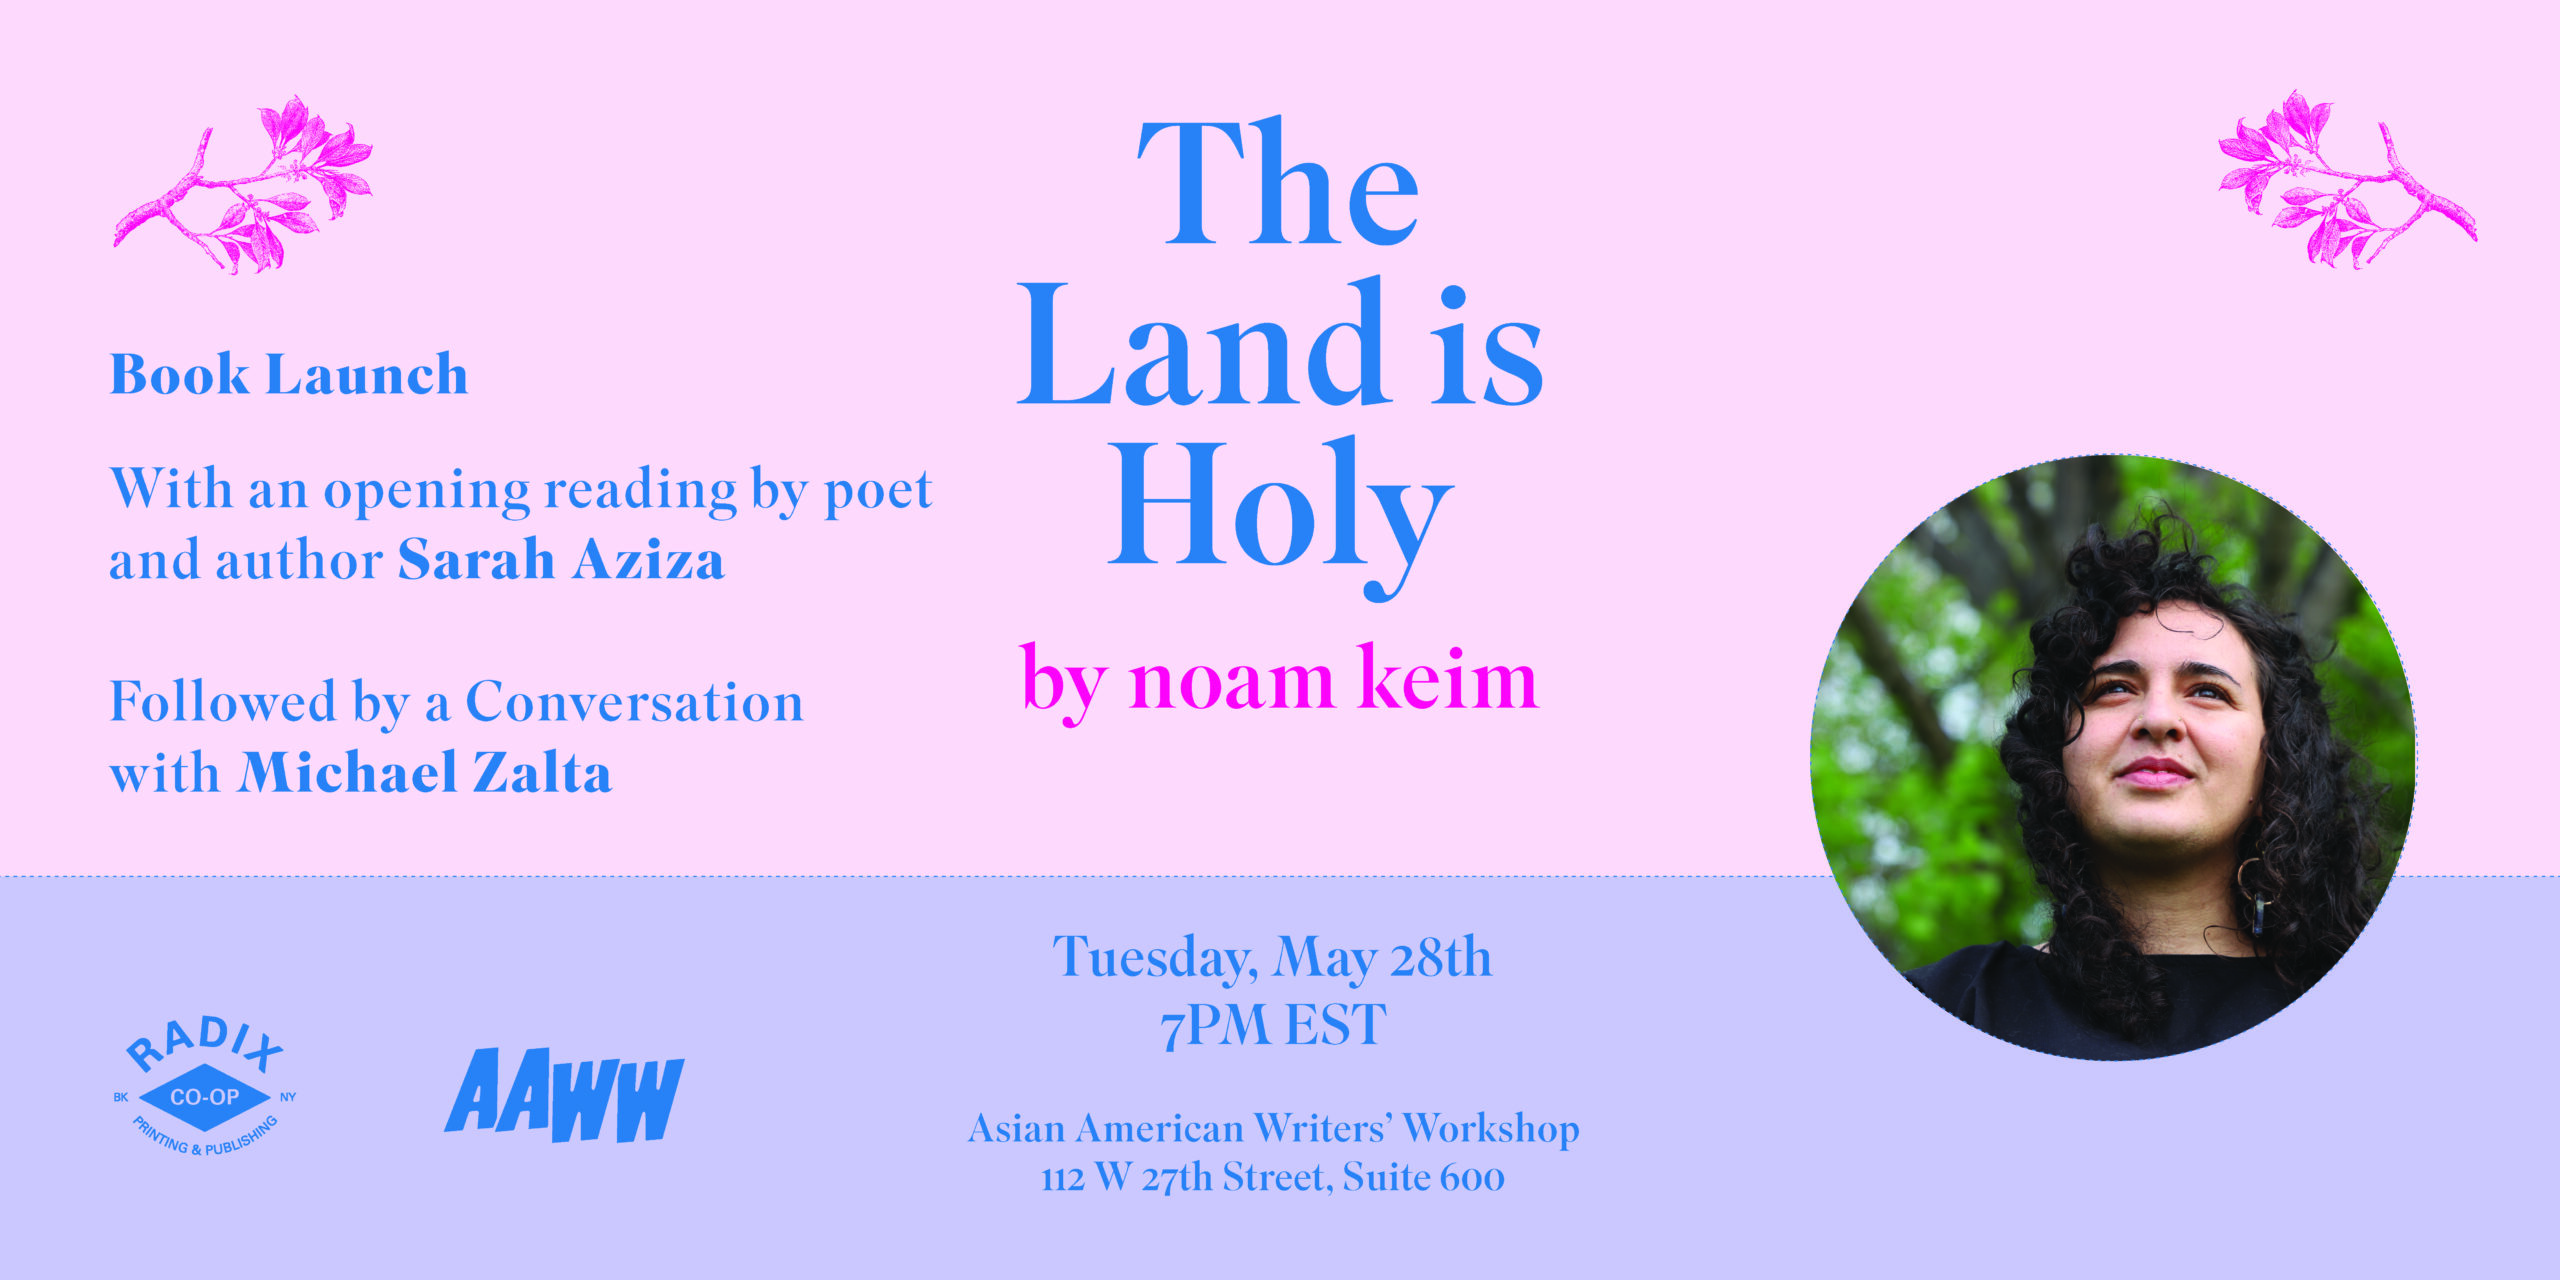 [IN PERSON] In Celebration of noam keim's The Land is Holy with Sarah Aziza and Michael Zalta